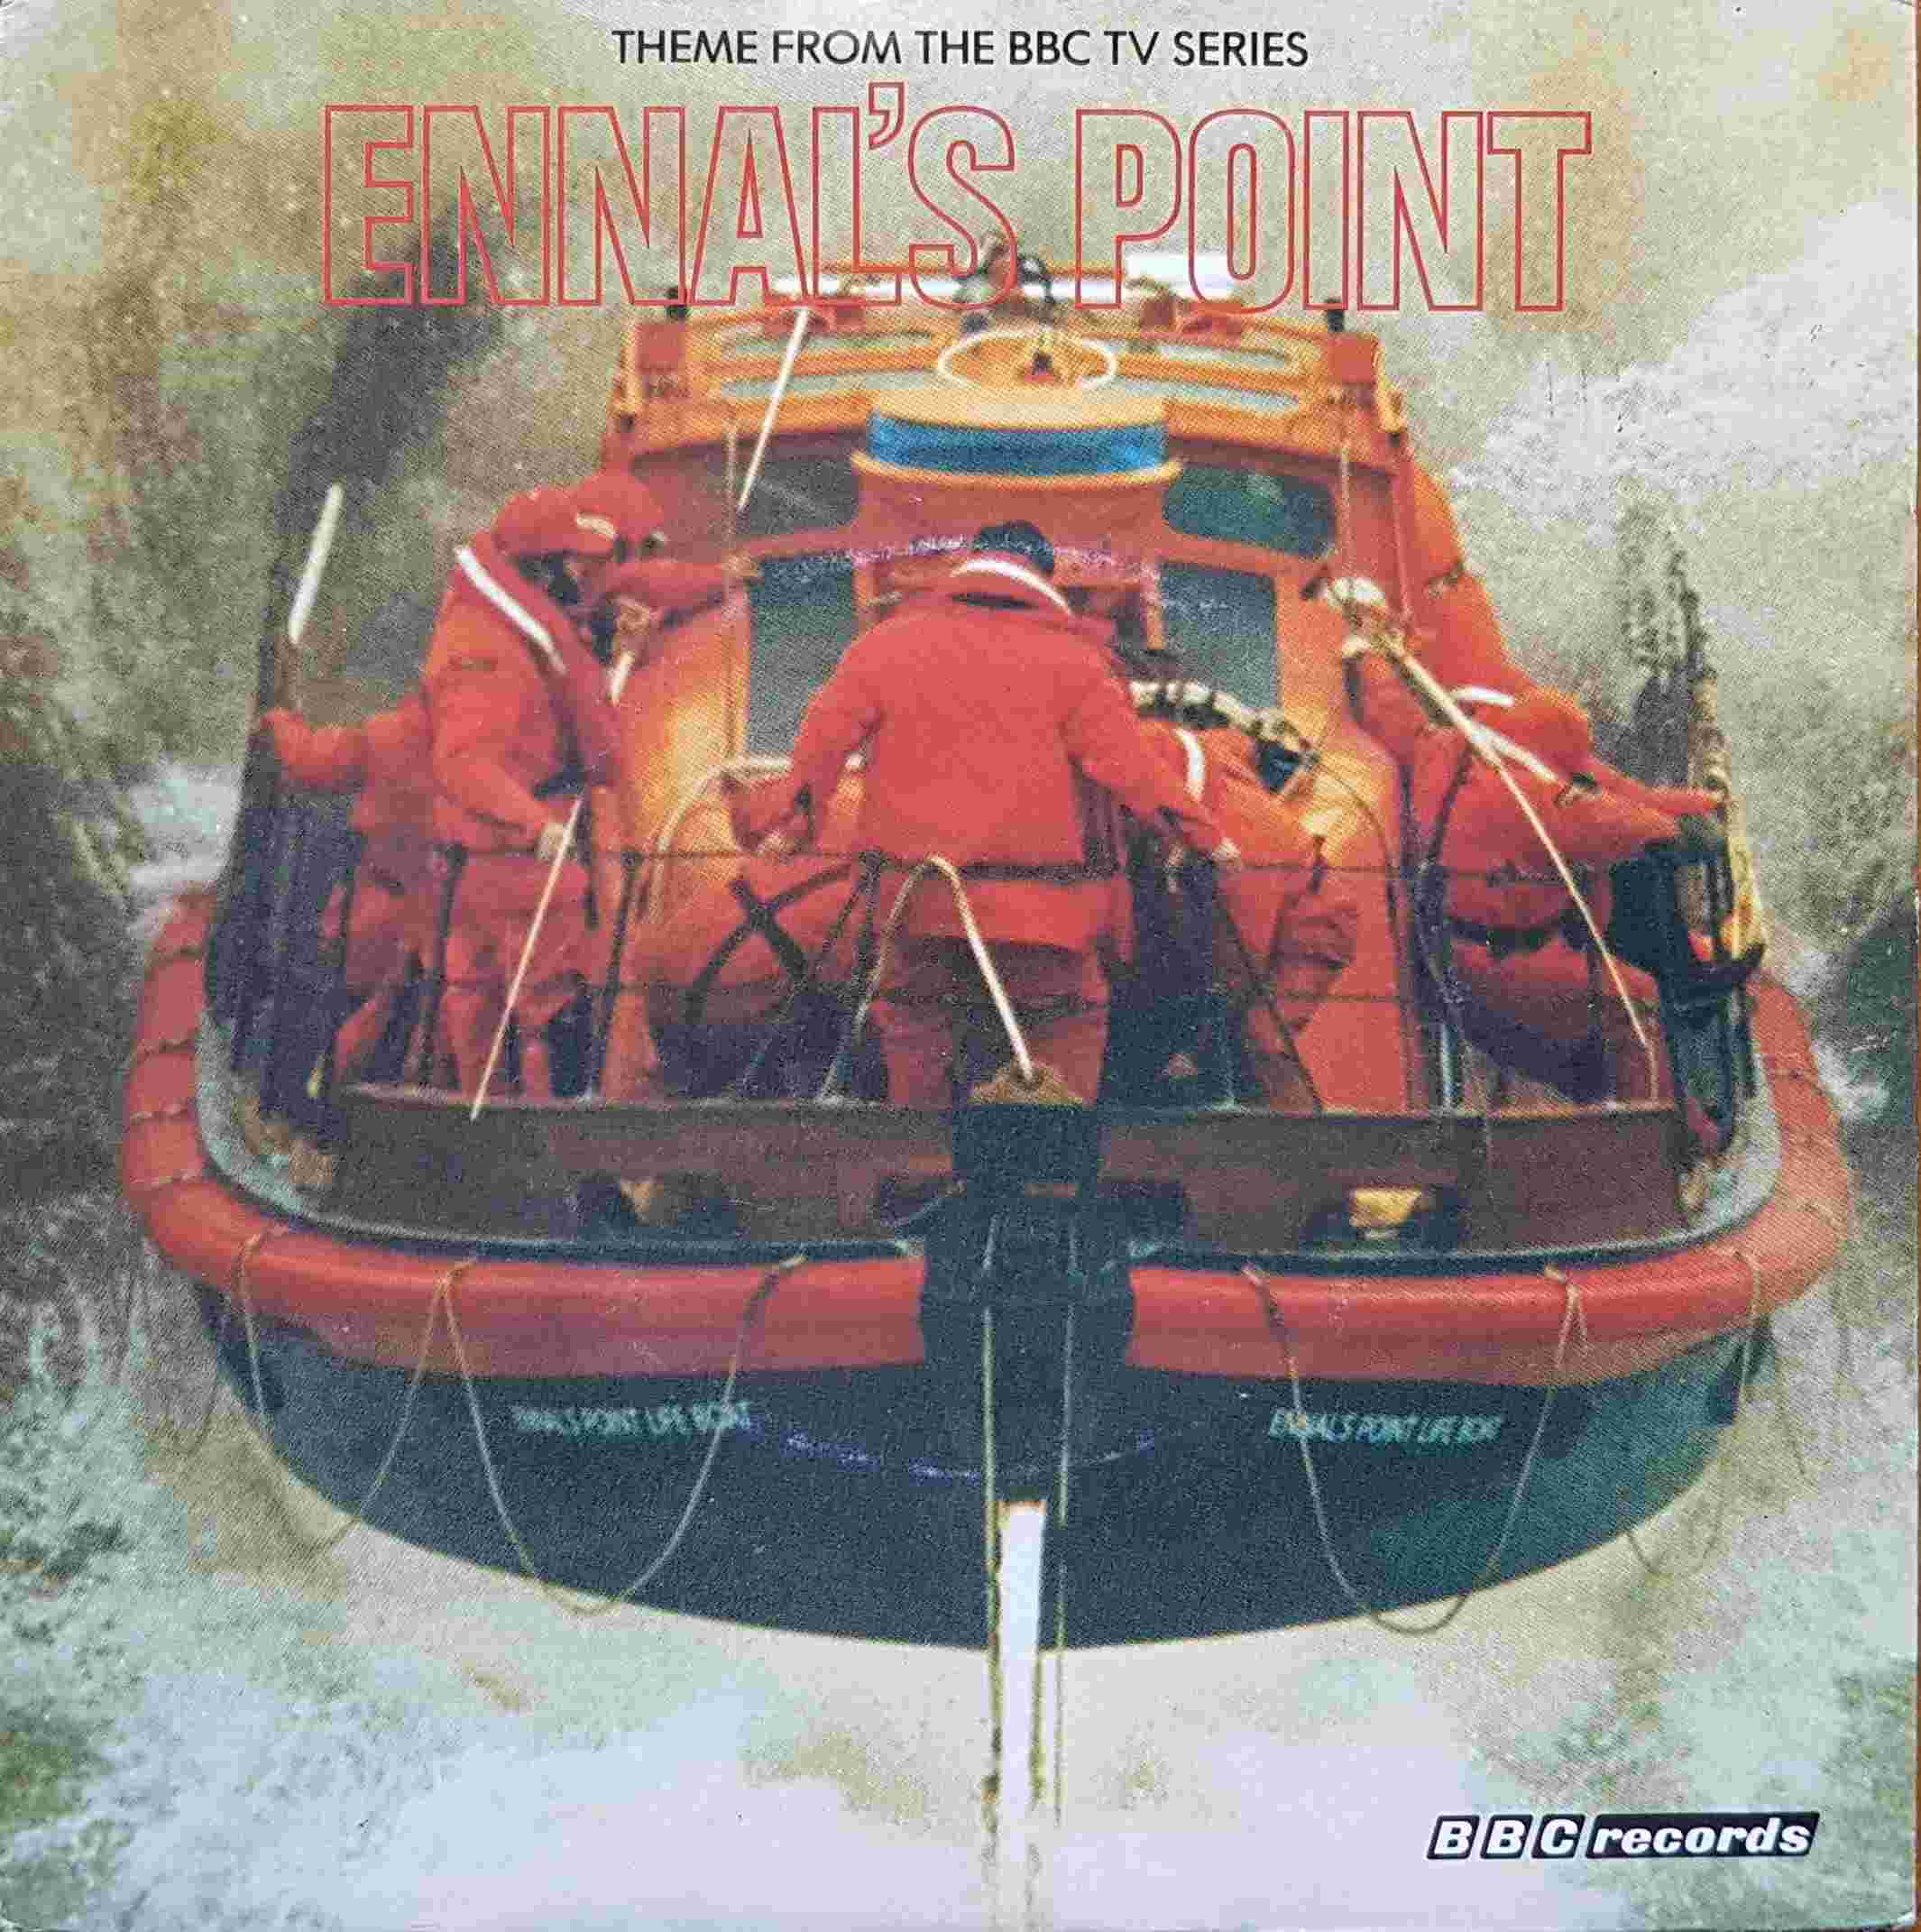 Picture of RESL 109 Ennal's point by artist Hazel O'Connor / Mike Townsend from the BBC singles - Records and Tapes library